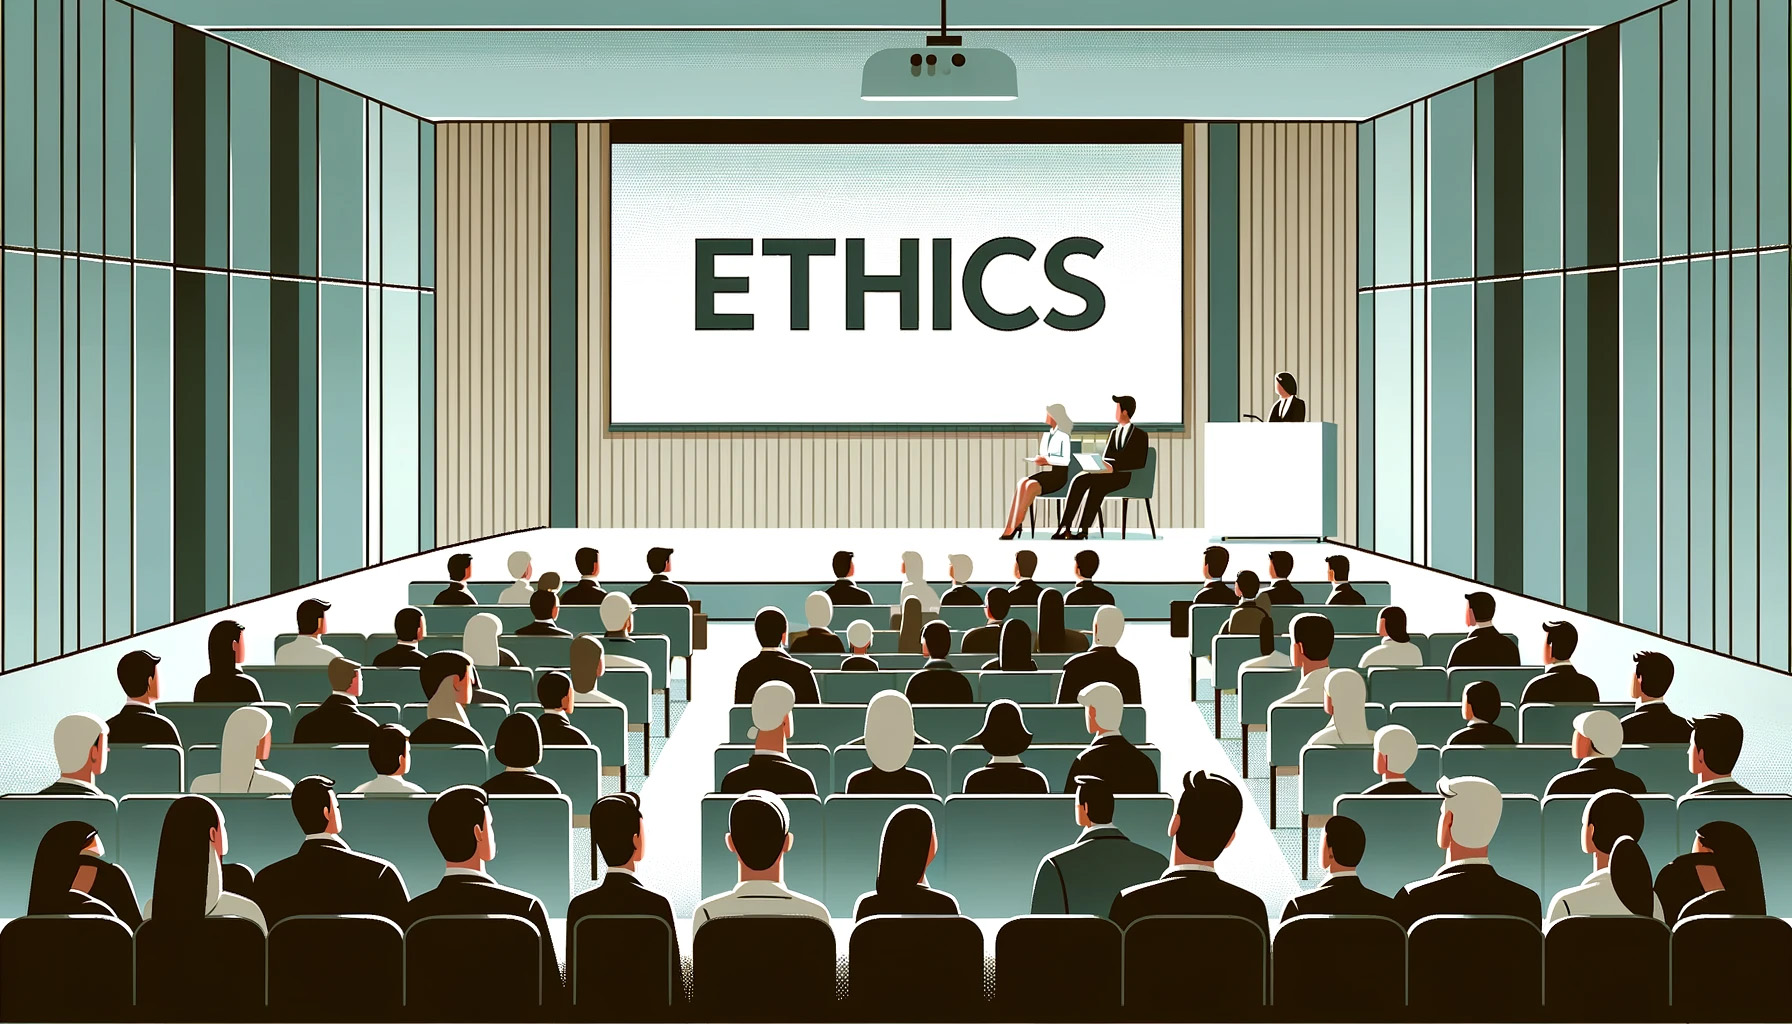 "ethics" written on a big screen in a lecture hall filled with businesspeople